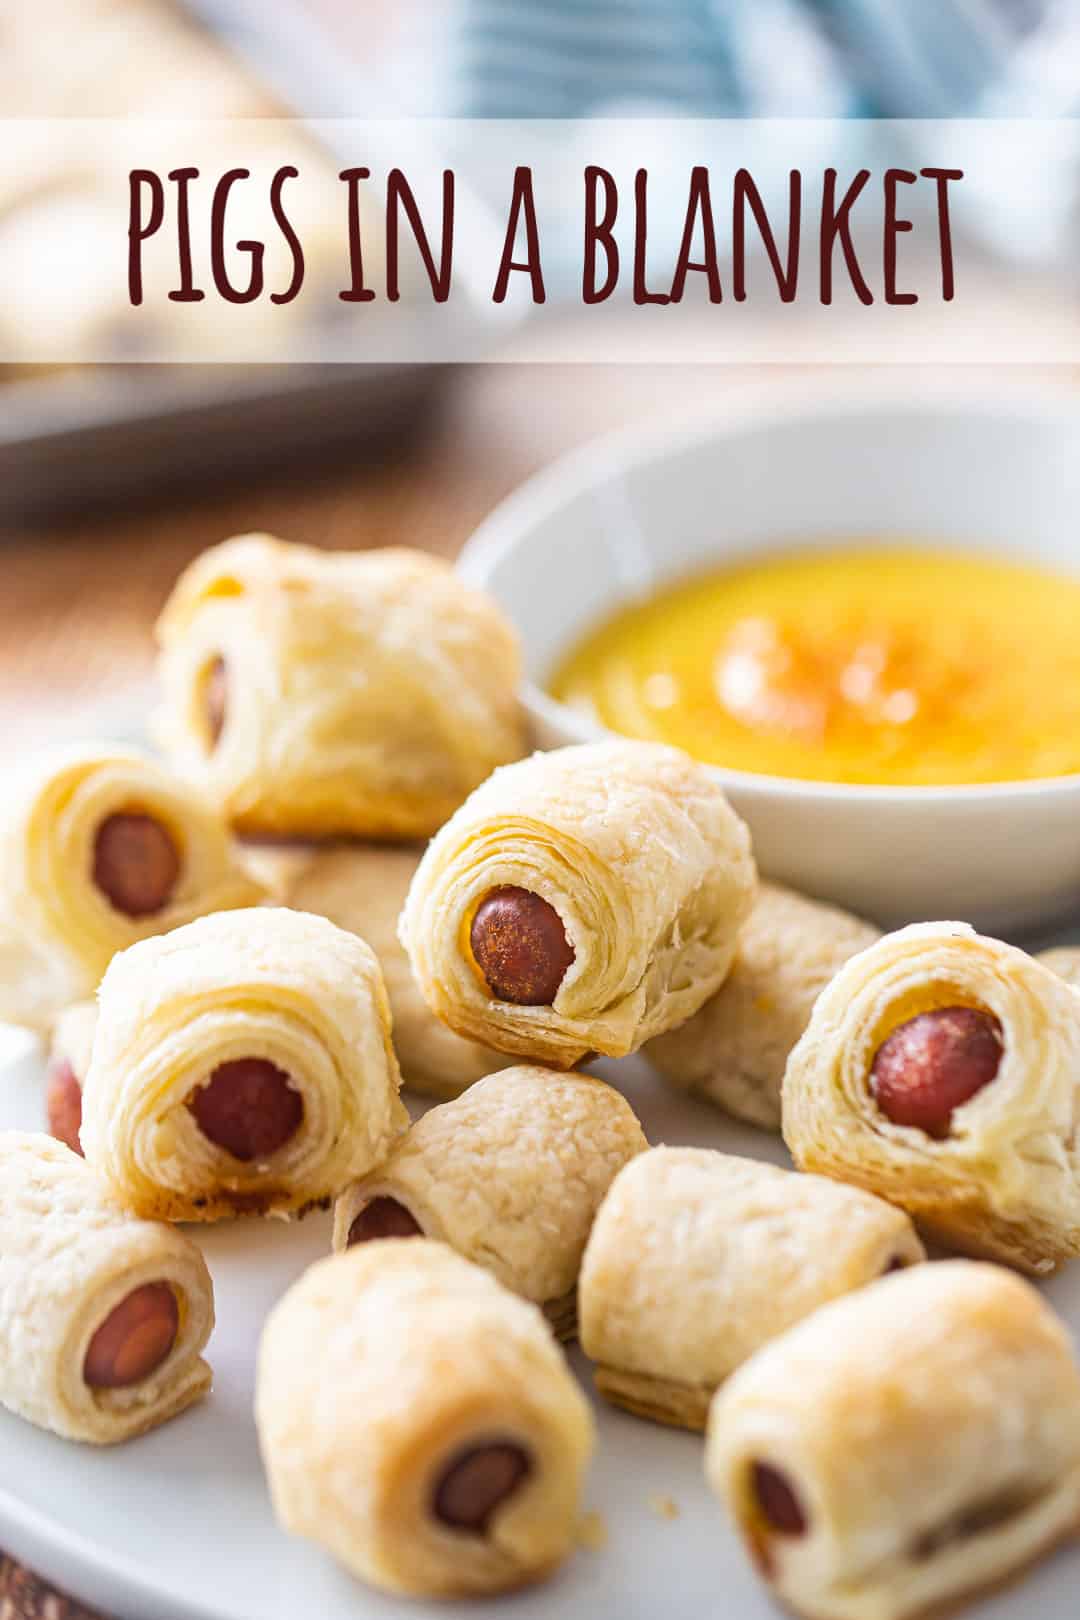 Pigs in a blanket recipe prepared from scratch with a text overlay above that reads "Pigs in a Blanket."